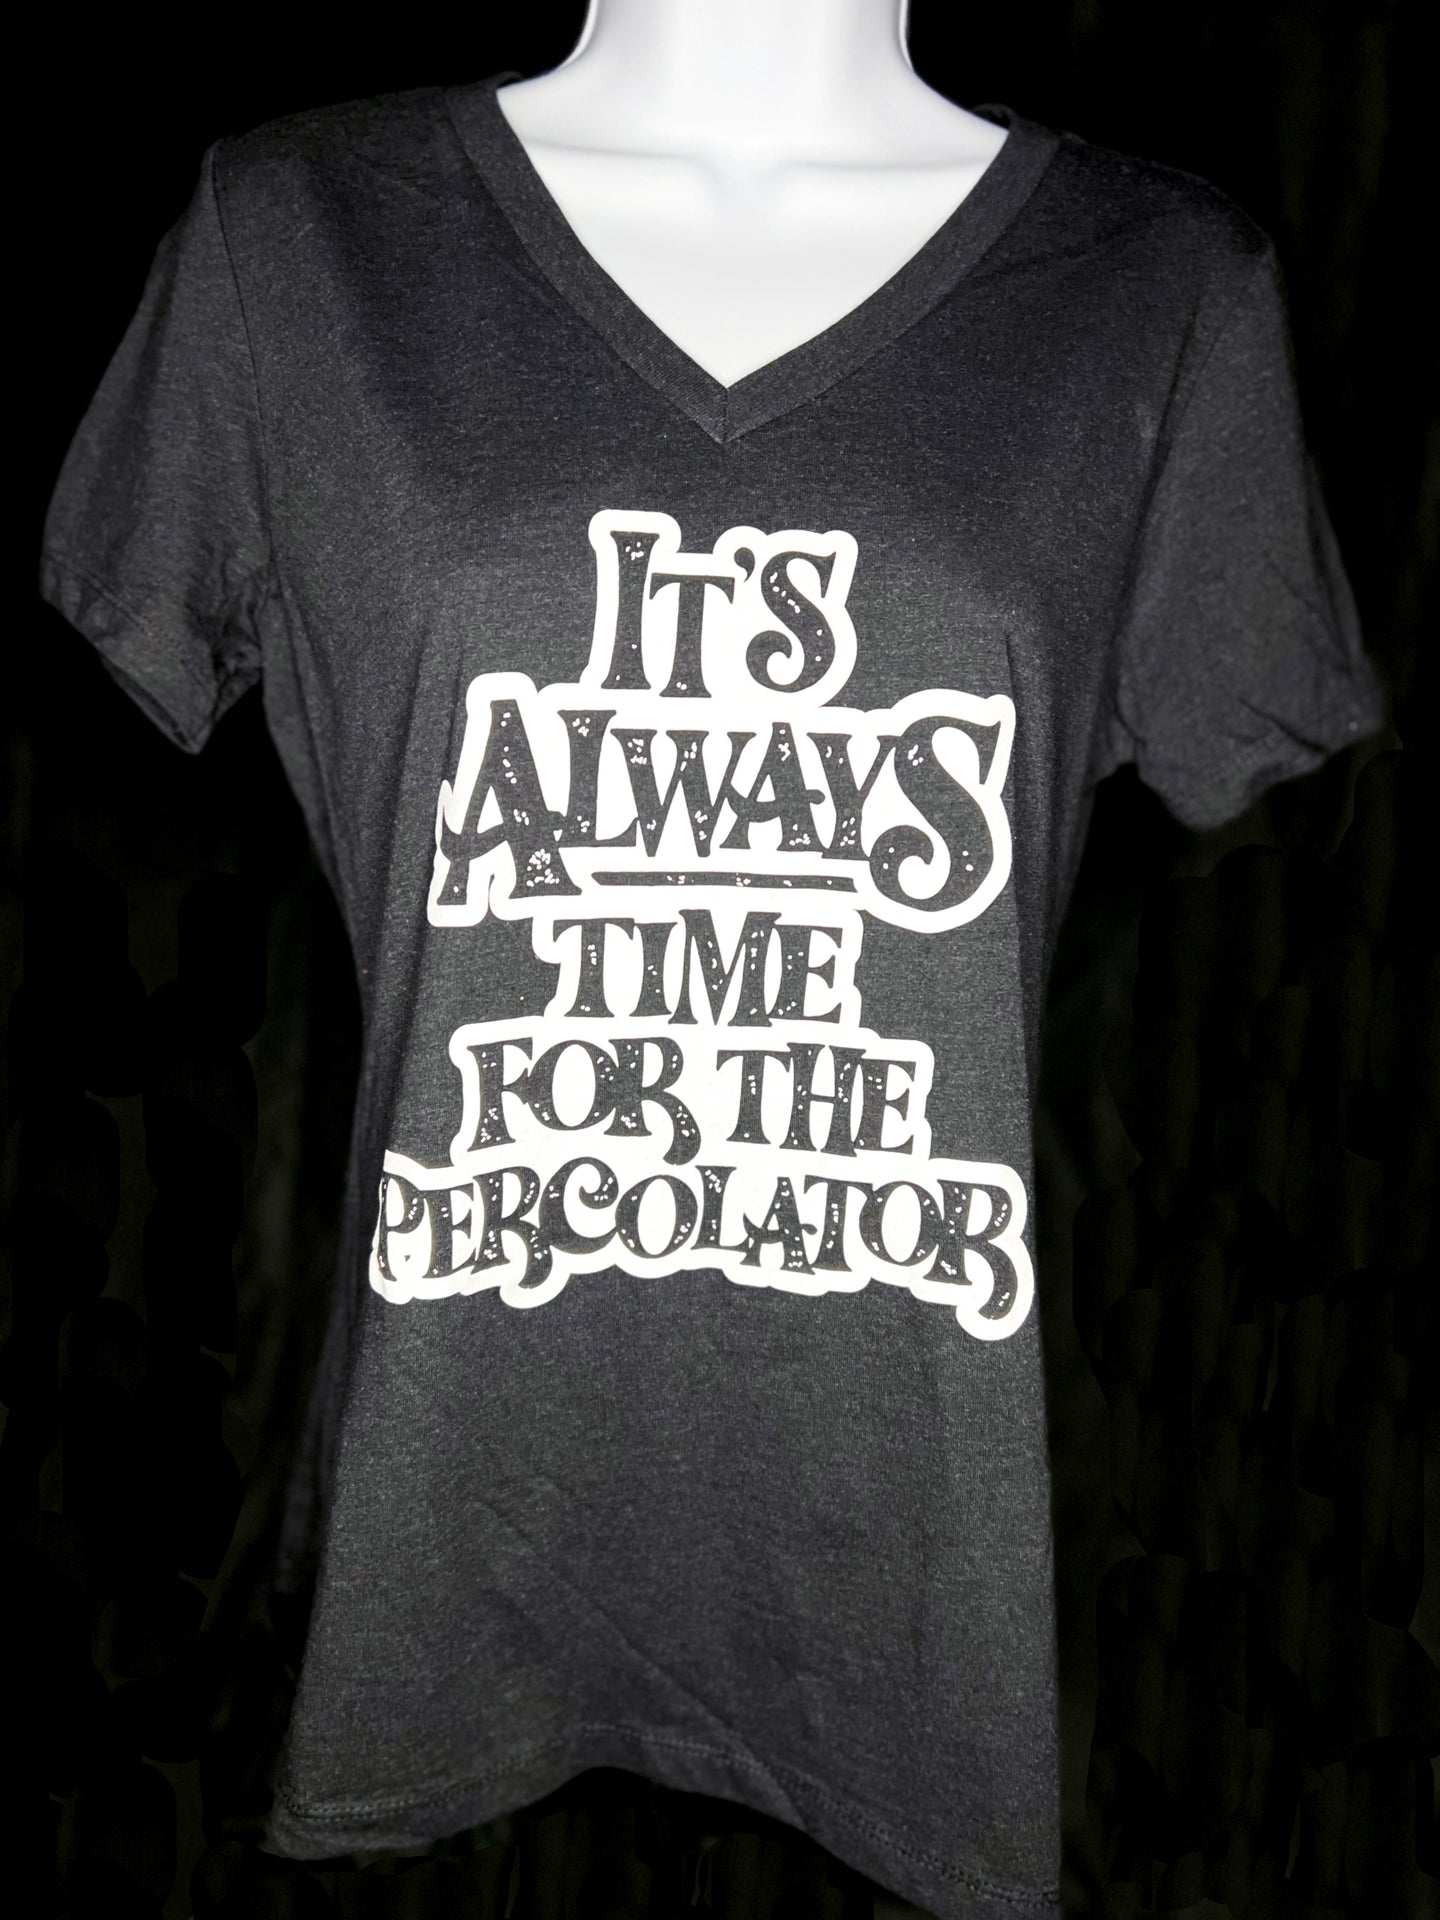 It's ALWAYS Time For The Percolator™ - Heather Black V-Neck T-Shirt (Women's)